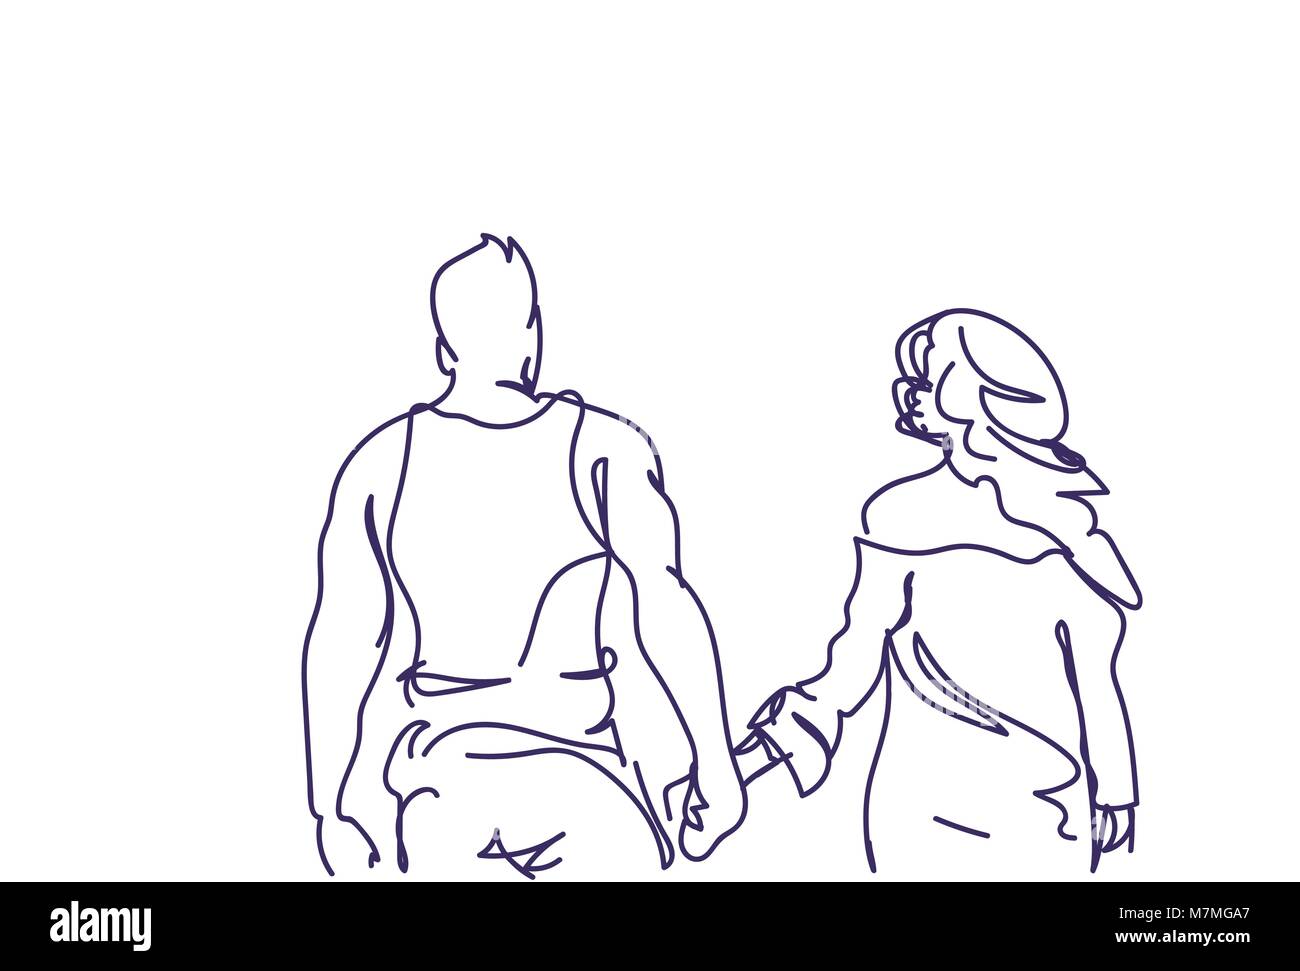 Doodle Couple Walk Holding Hands Back Rear View Sketch Man And Woman Over White Background Stock Vector